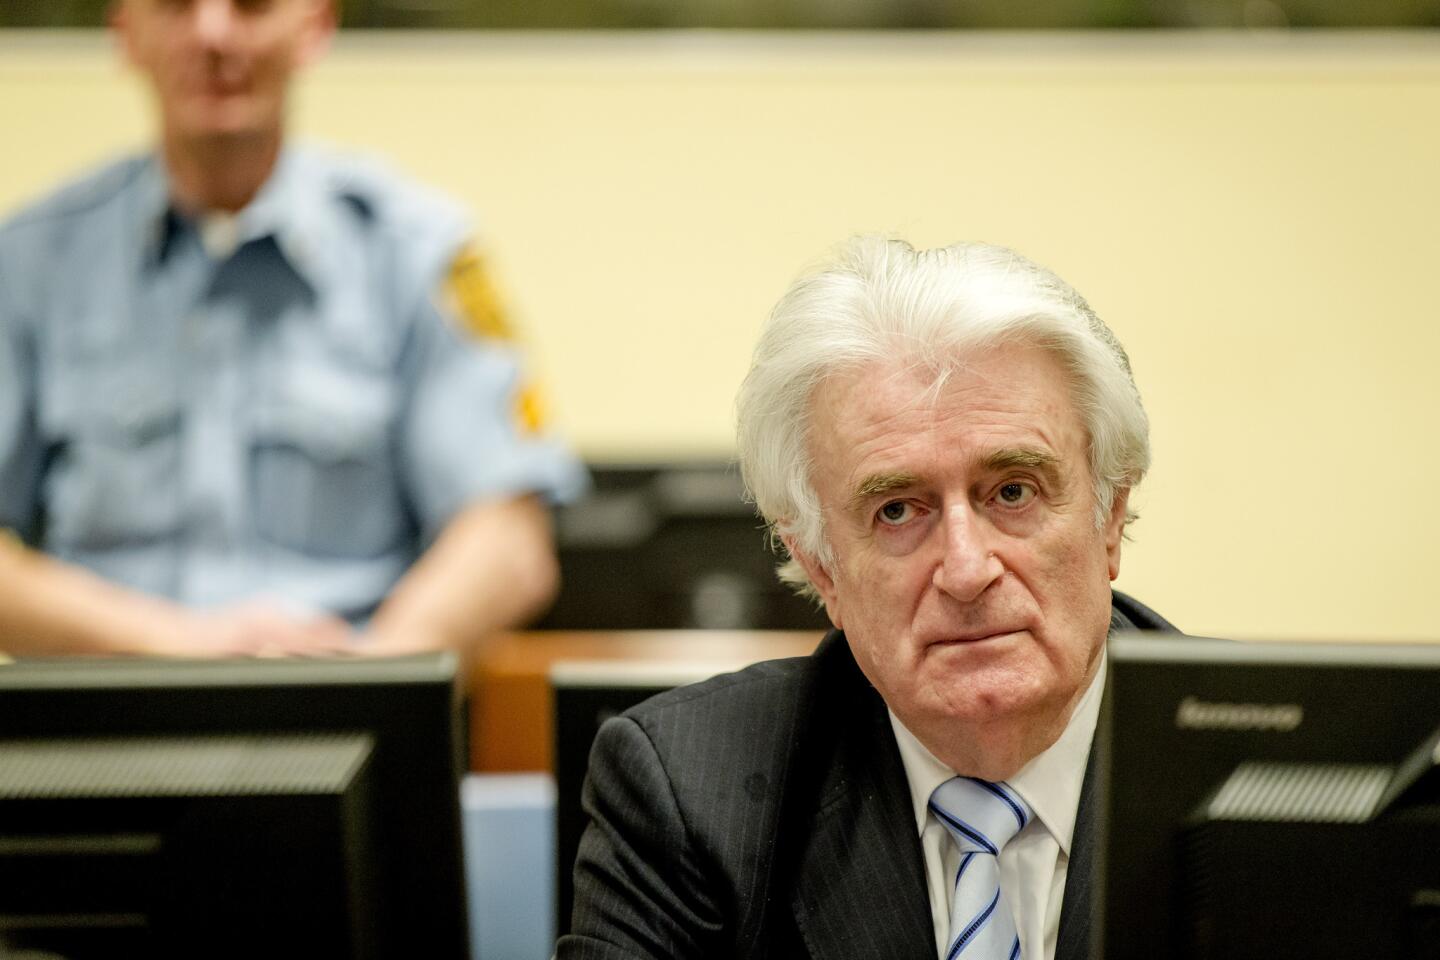 Bosnian Serb wartime leader Radovan Karadzic sits in the courtroom for the reading of his verdict at the International Criminal Tribunal for Former Yugoslavia in The Hague on March 24, 2016.